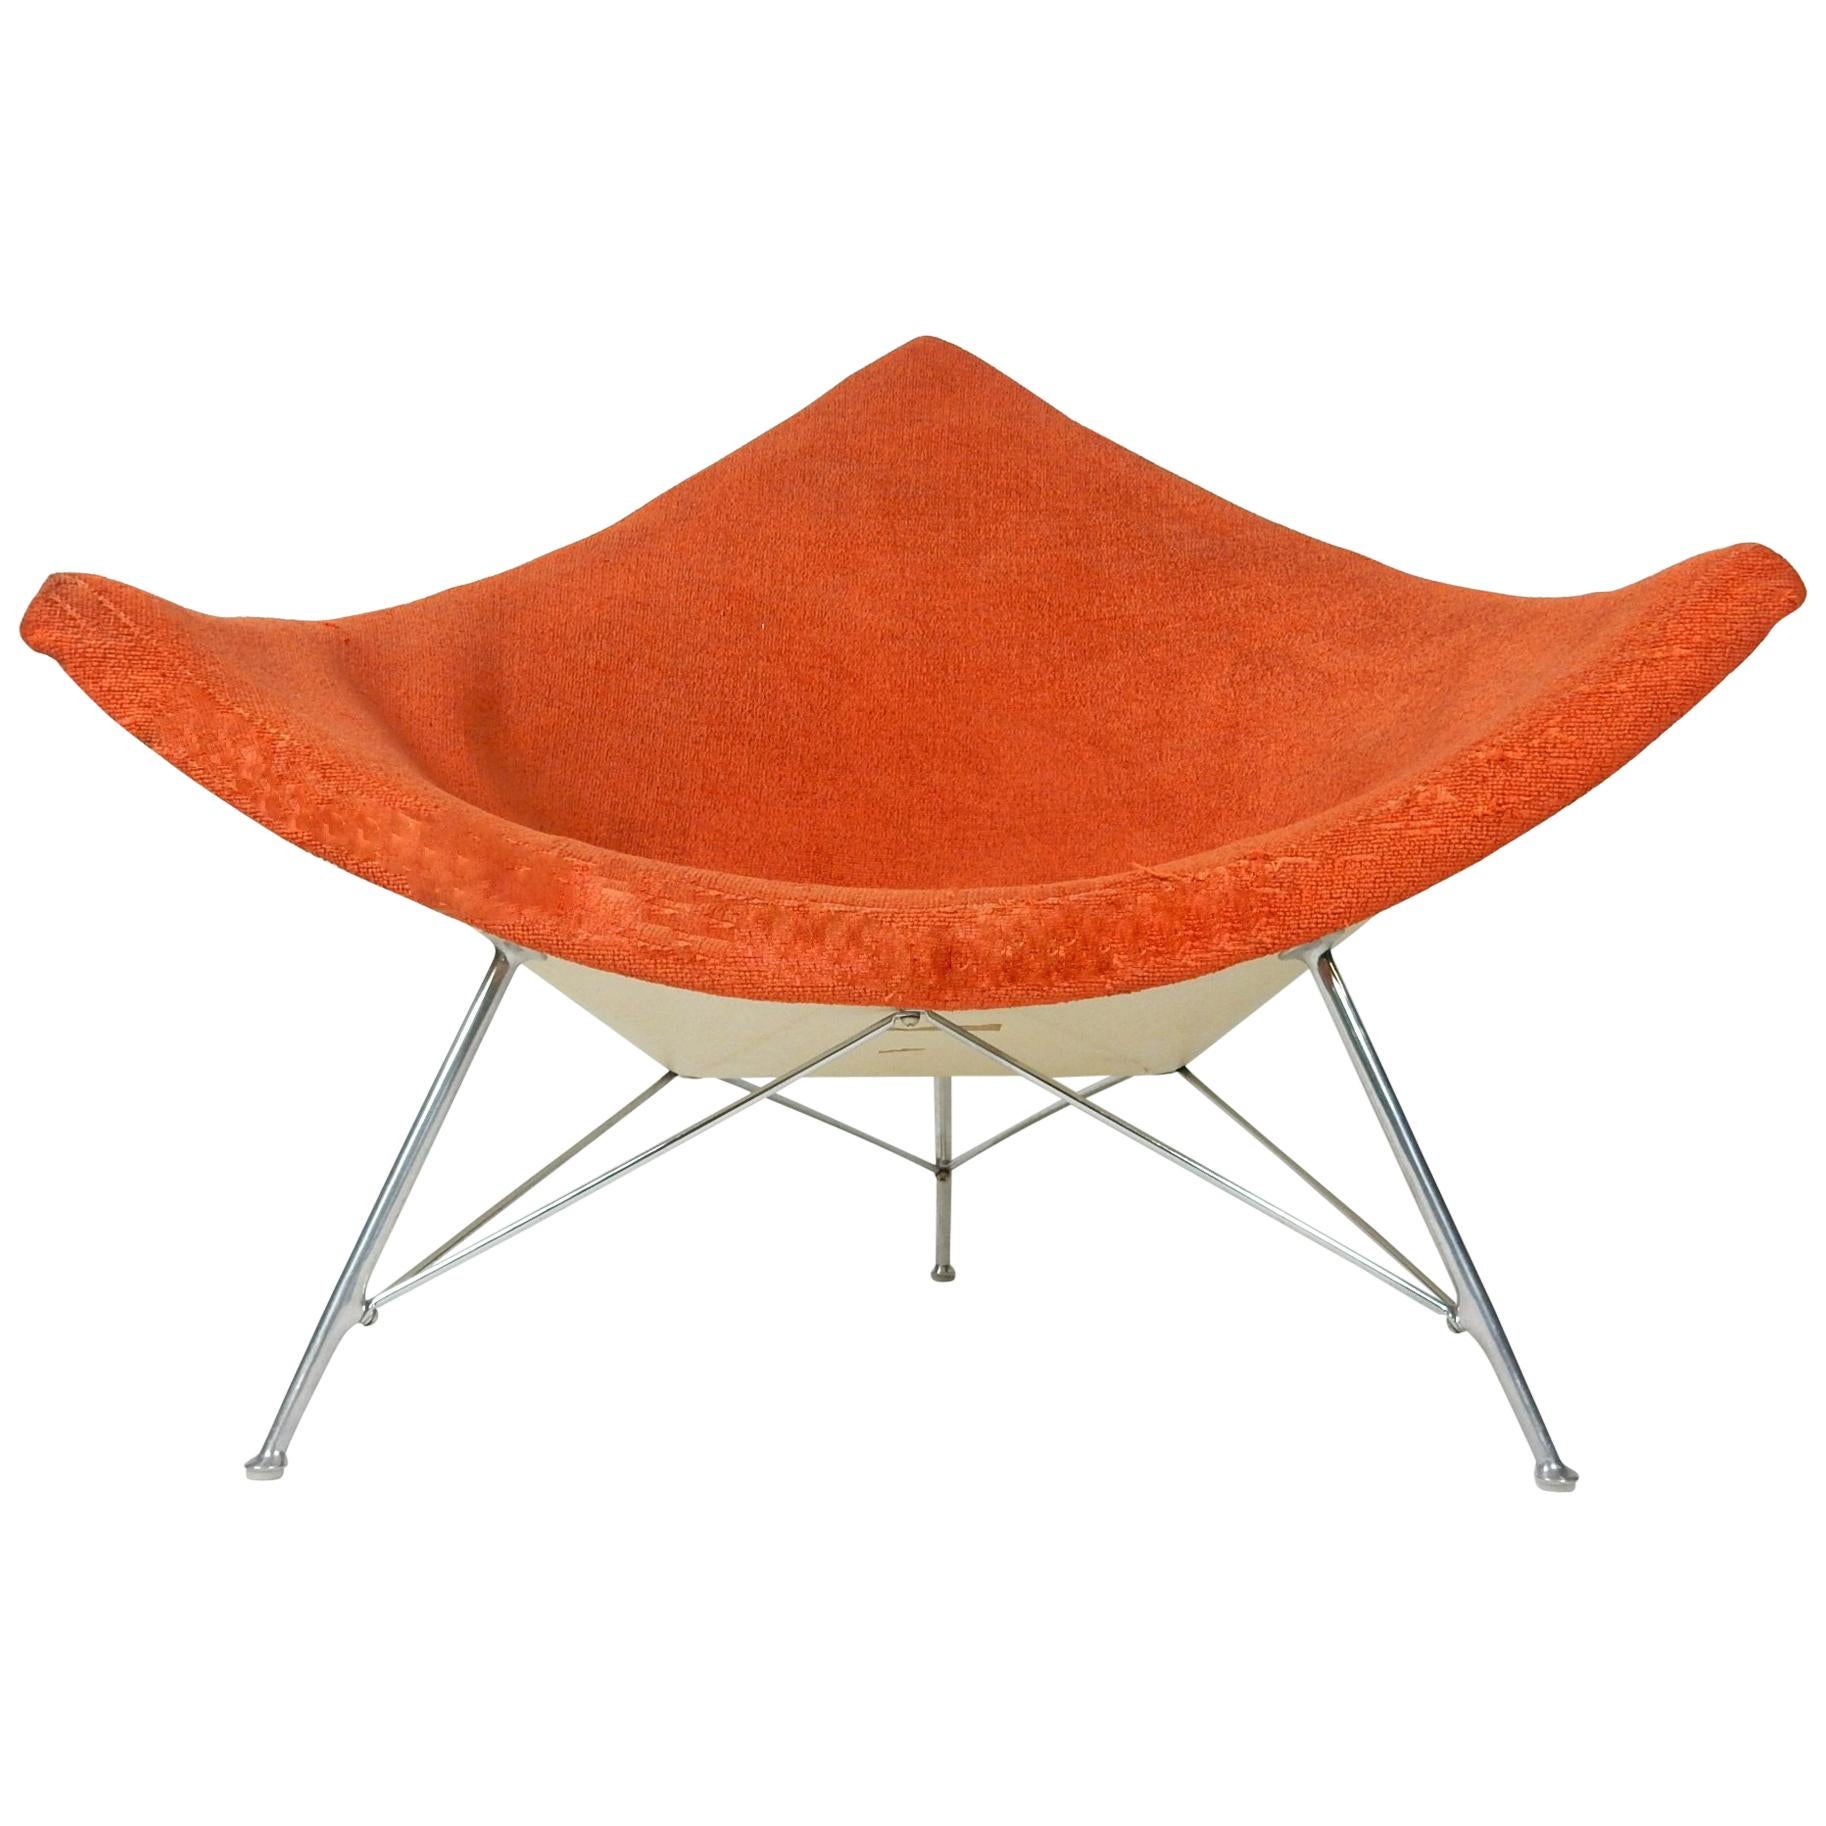 Early George Nelson for Knoll Coconut Lounge Chair